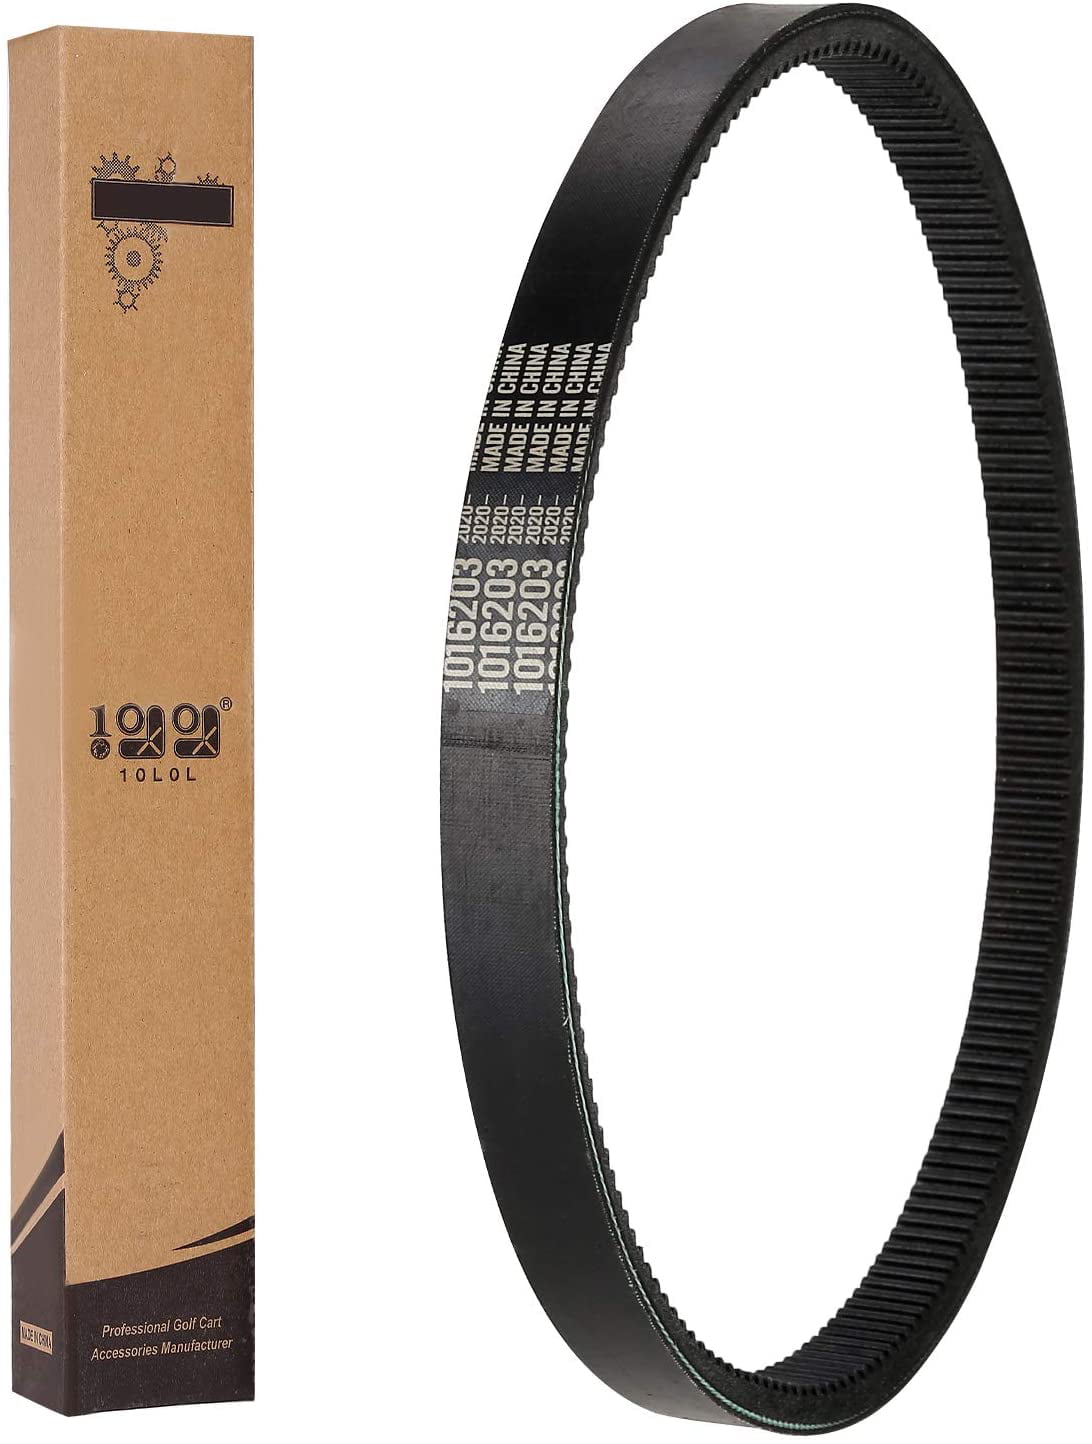 Drive-up Club Car Drive Belt for 1992-Up DS and 2004-Up Precedent Gas 1016203 